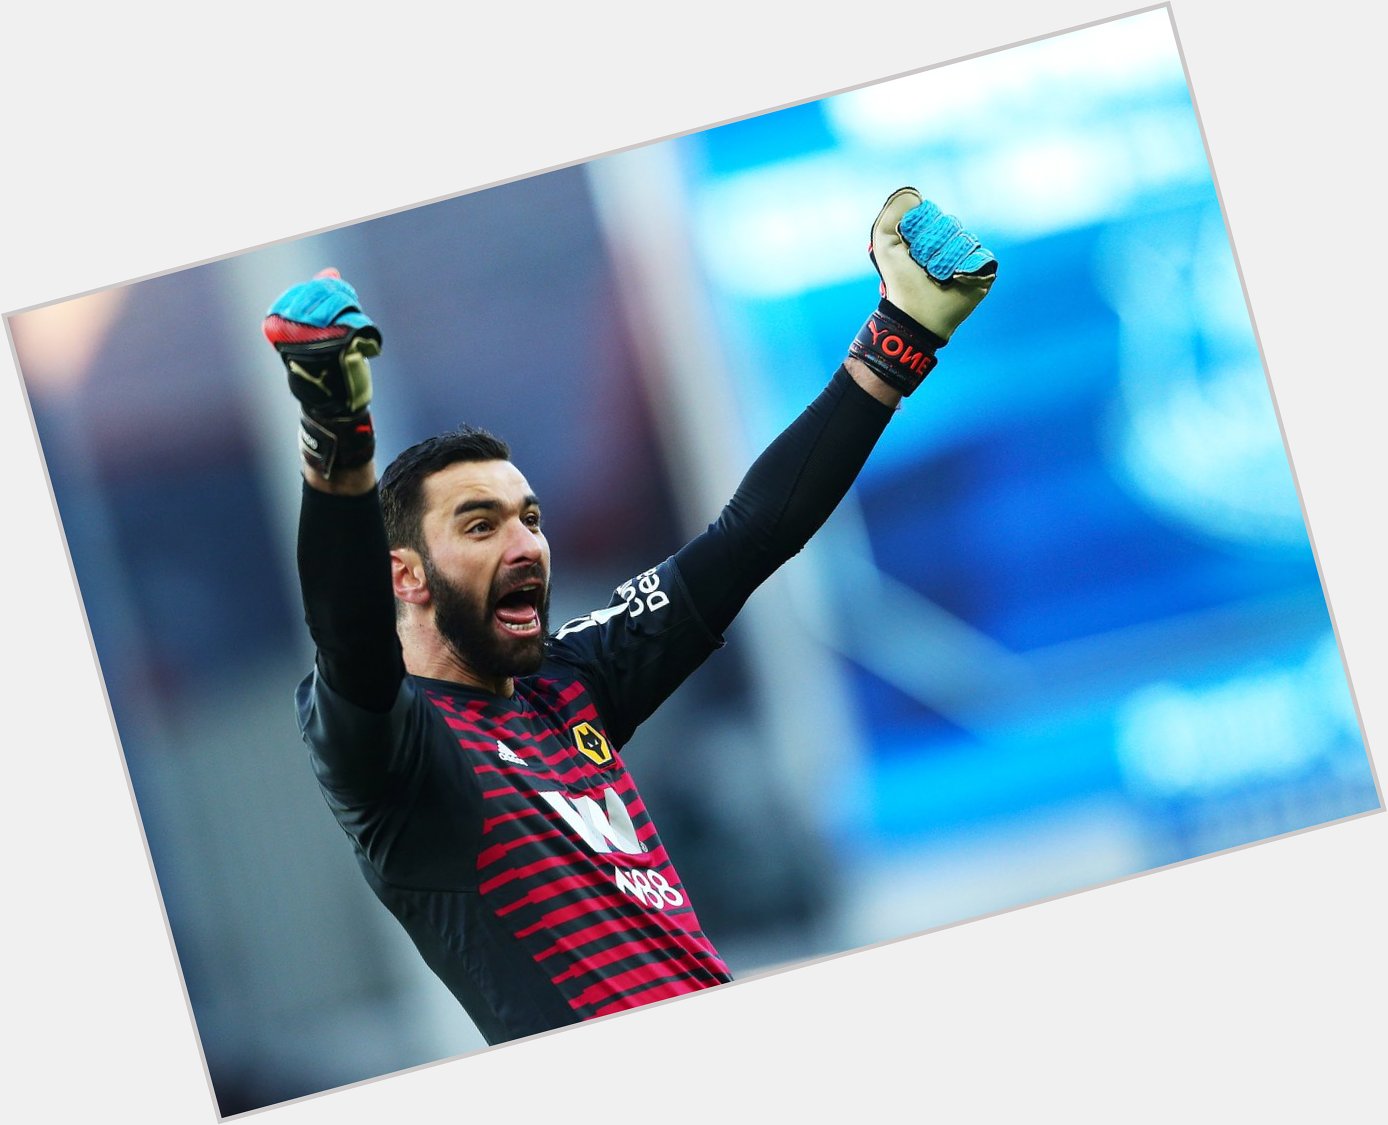  Happy 31st birthday Rui Patricio!

Has he been one of the signings of the season?  